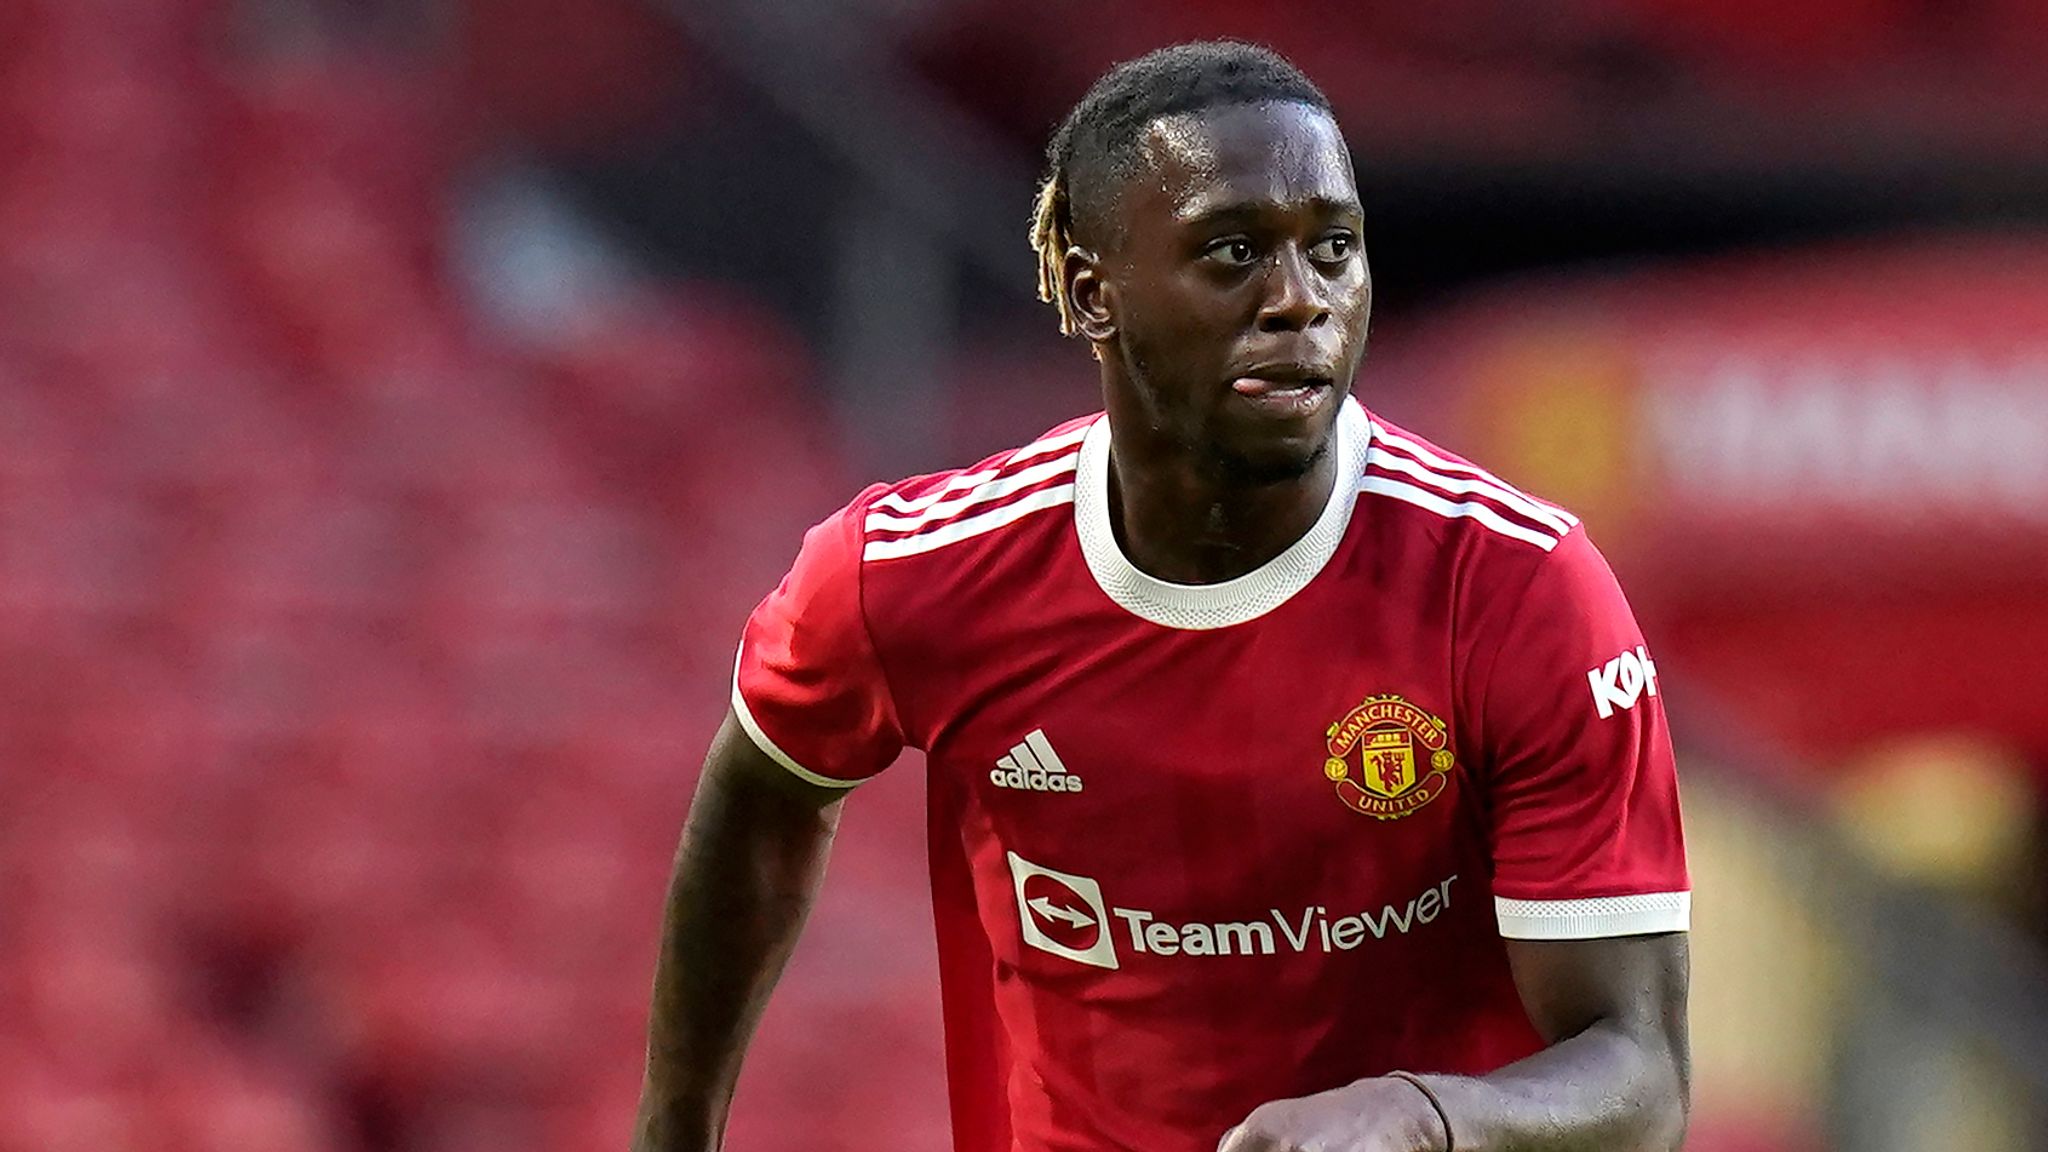 Aaron Wan-Bissaka: Manchester United defender pleads guilty to three driving offences | Football News | Sky Sports